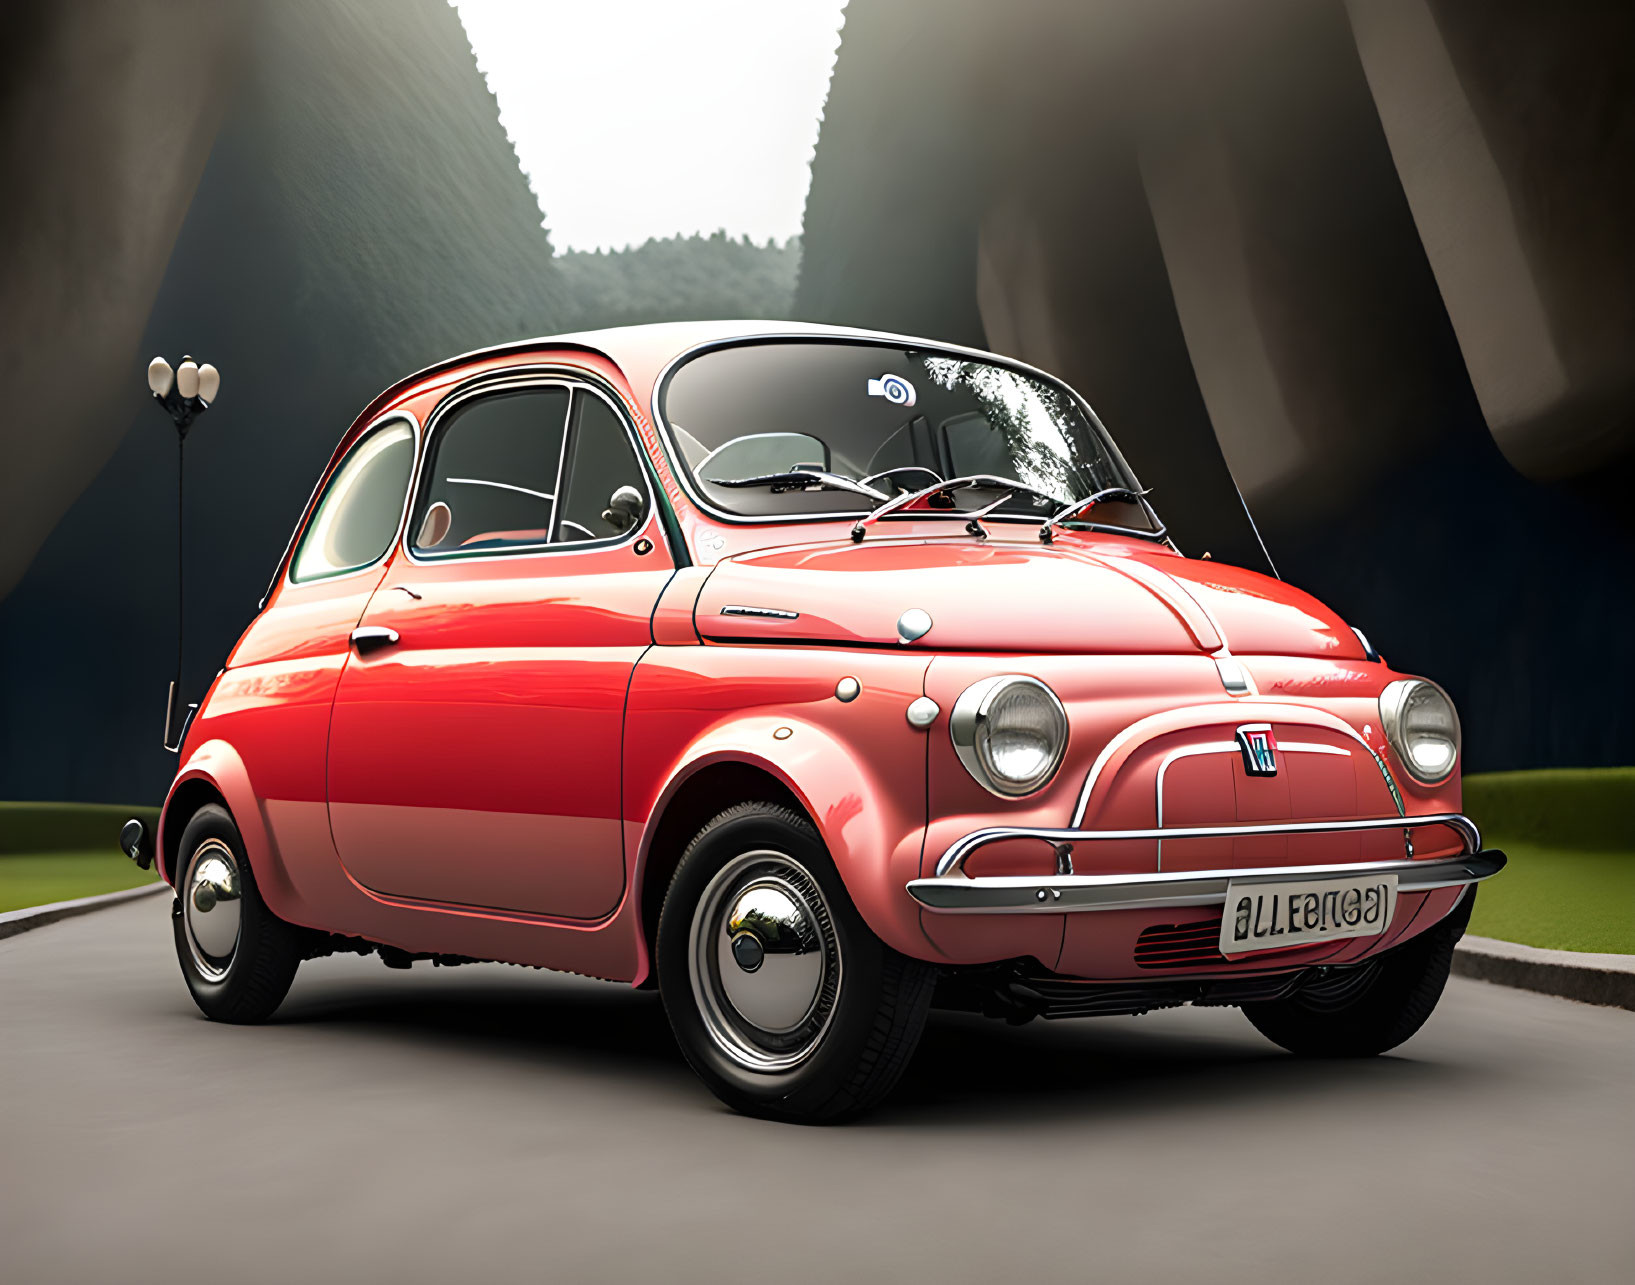 Vintage Fiat 500 with open sunroof and white sidewall tires on minimalist backdrop